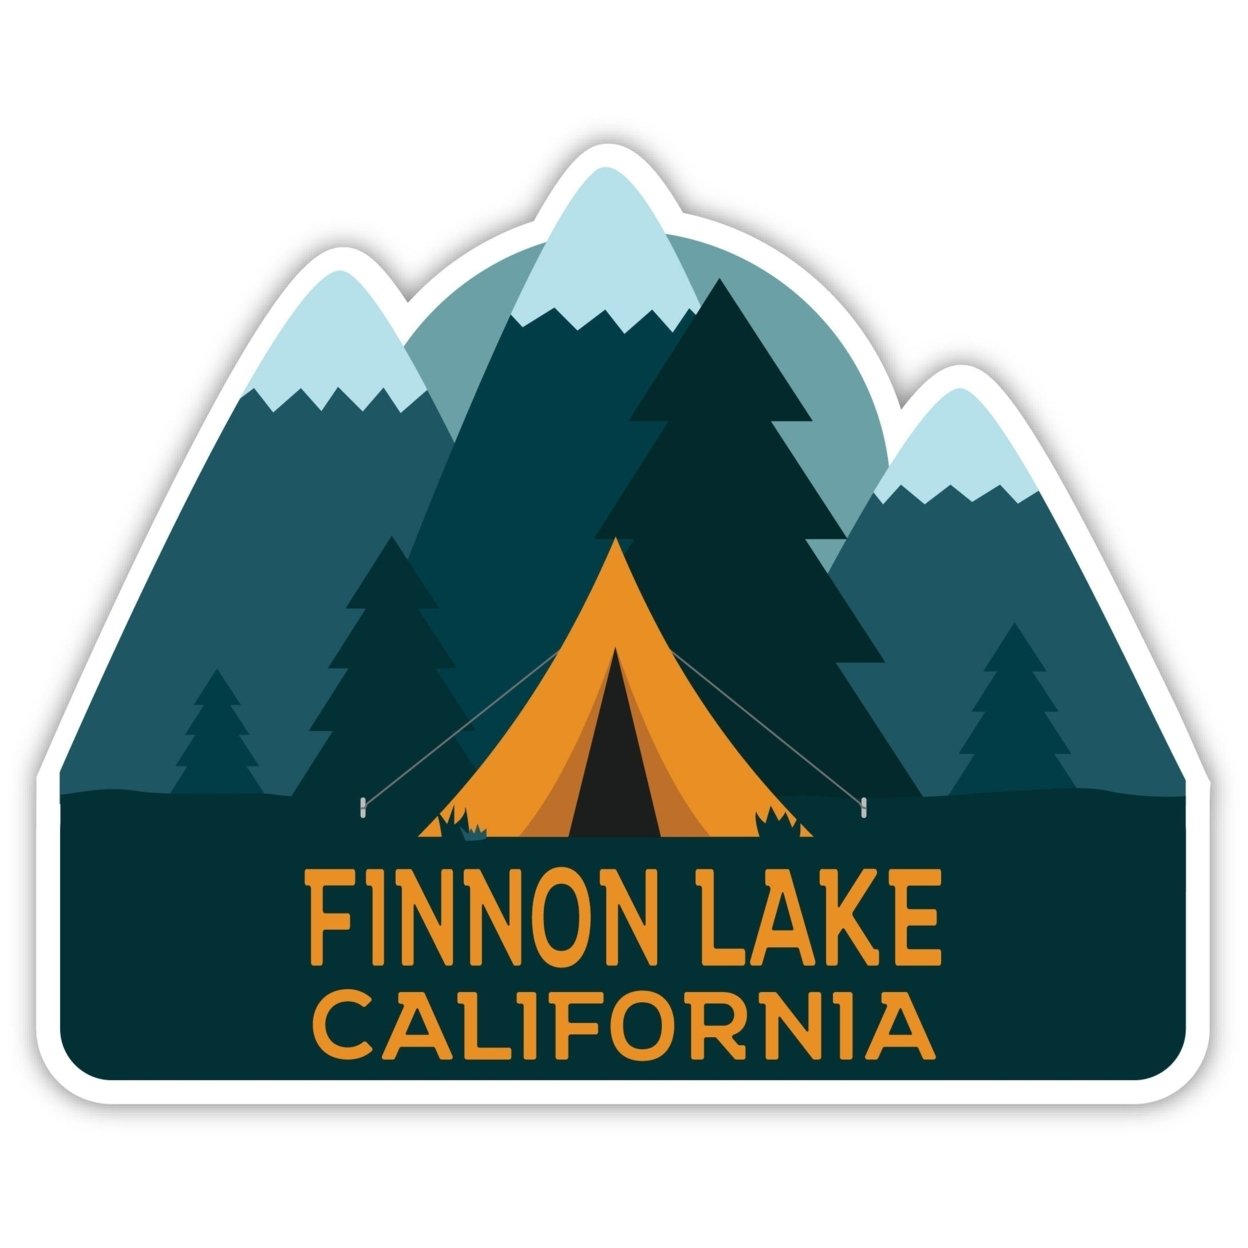 Finnon Lake California Souvenir Decorative Stickers (Choose Theme And Size) - 4-Pack, 4-Inch, Great Outdoors